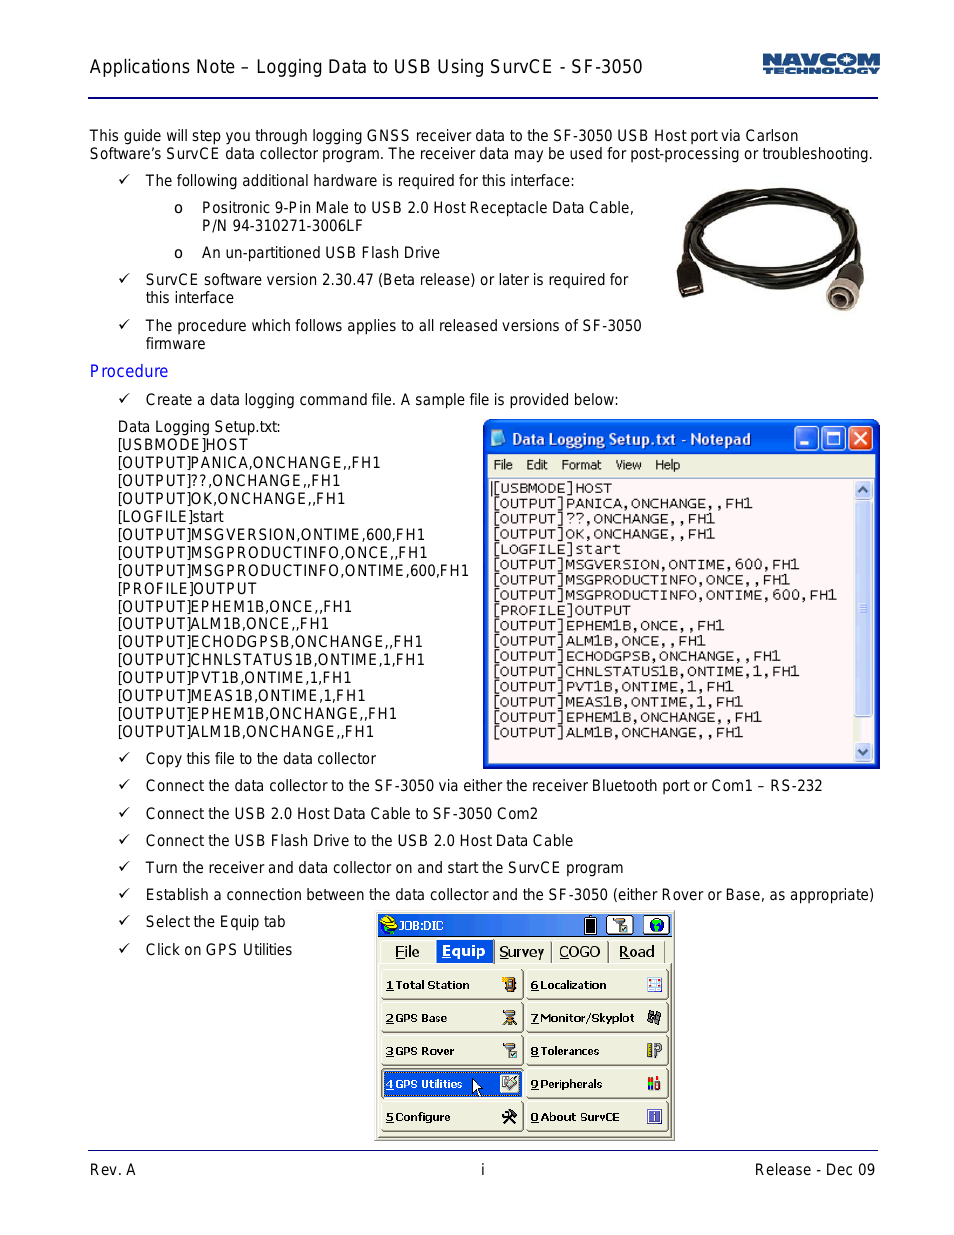 SF-3050 Logging Data to USB Using SurvCE